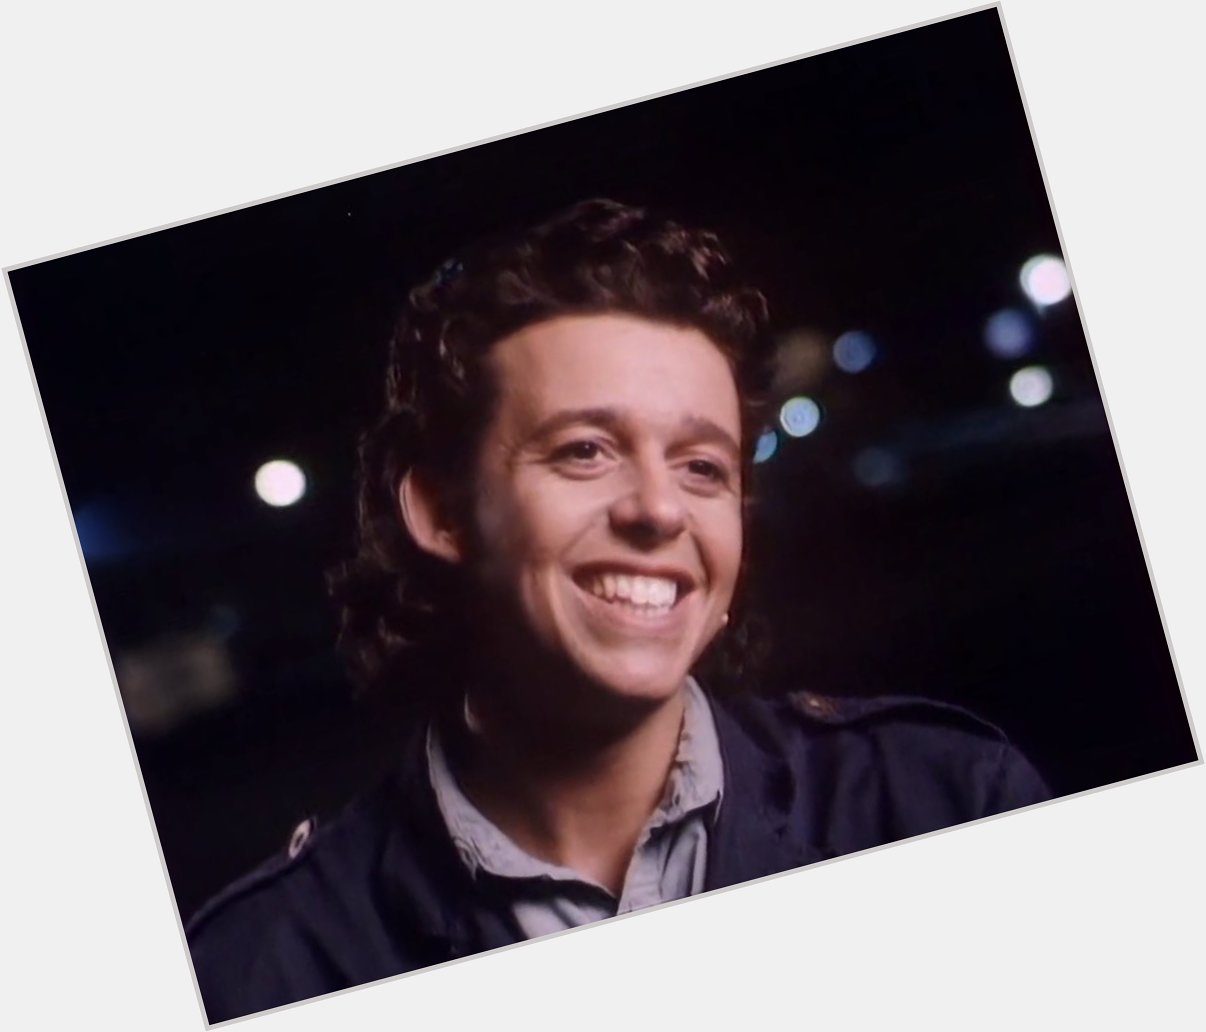 HAPPY BIRTHDAY TO MY FAVOURITE PERSON IN THE ENTIRE UNIVERSE I LOVE YOU SO MUCH ROLAND ORZABAL 